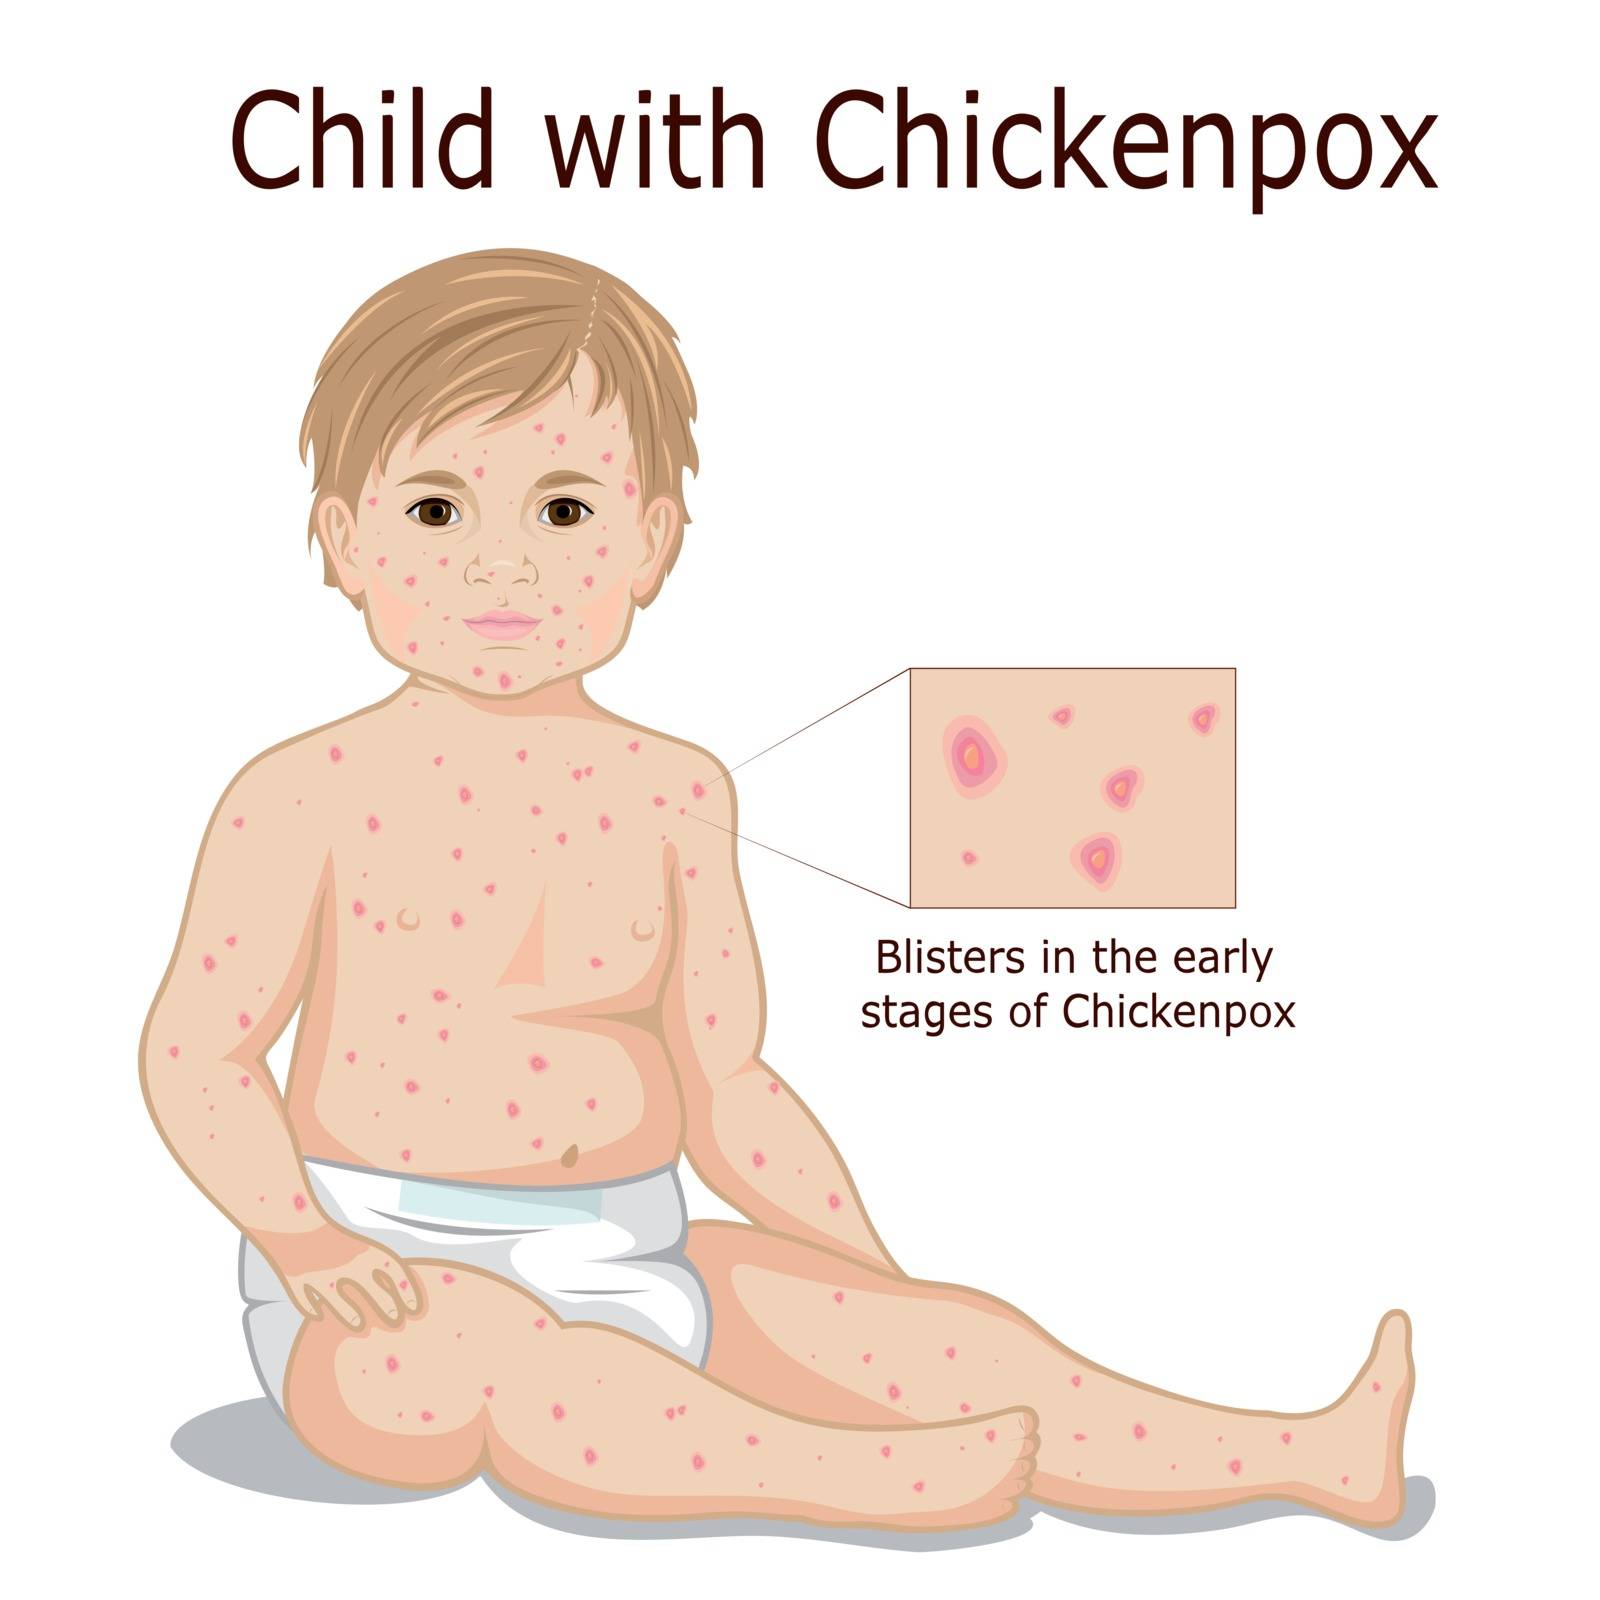 Child with Chickenpox by Scio21